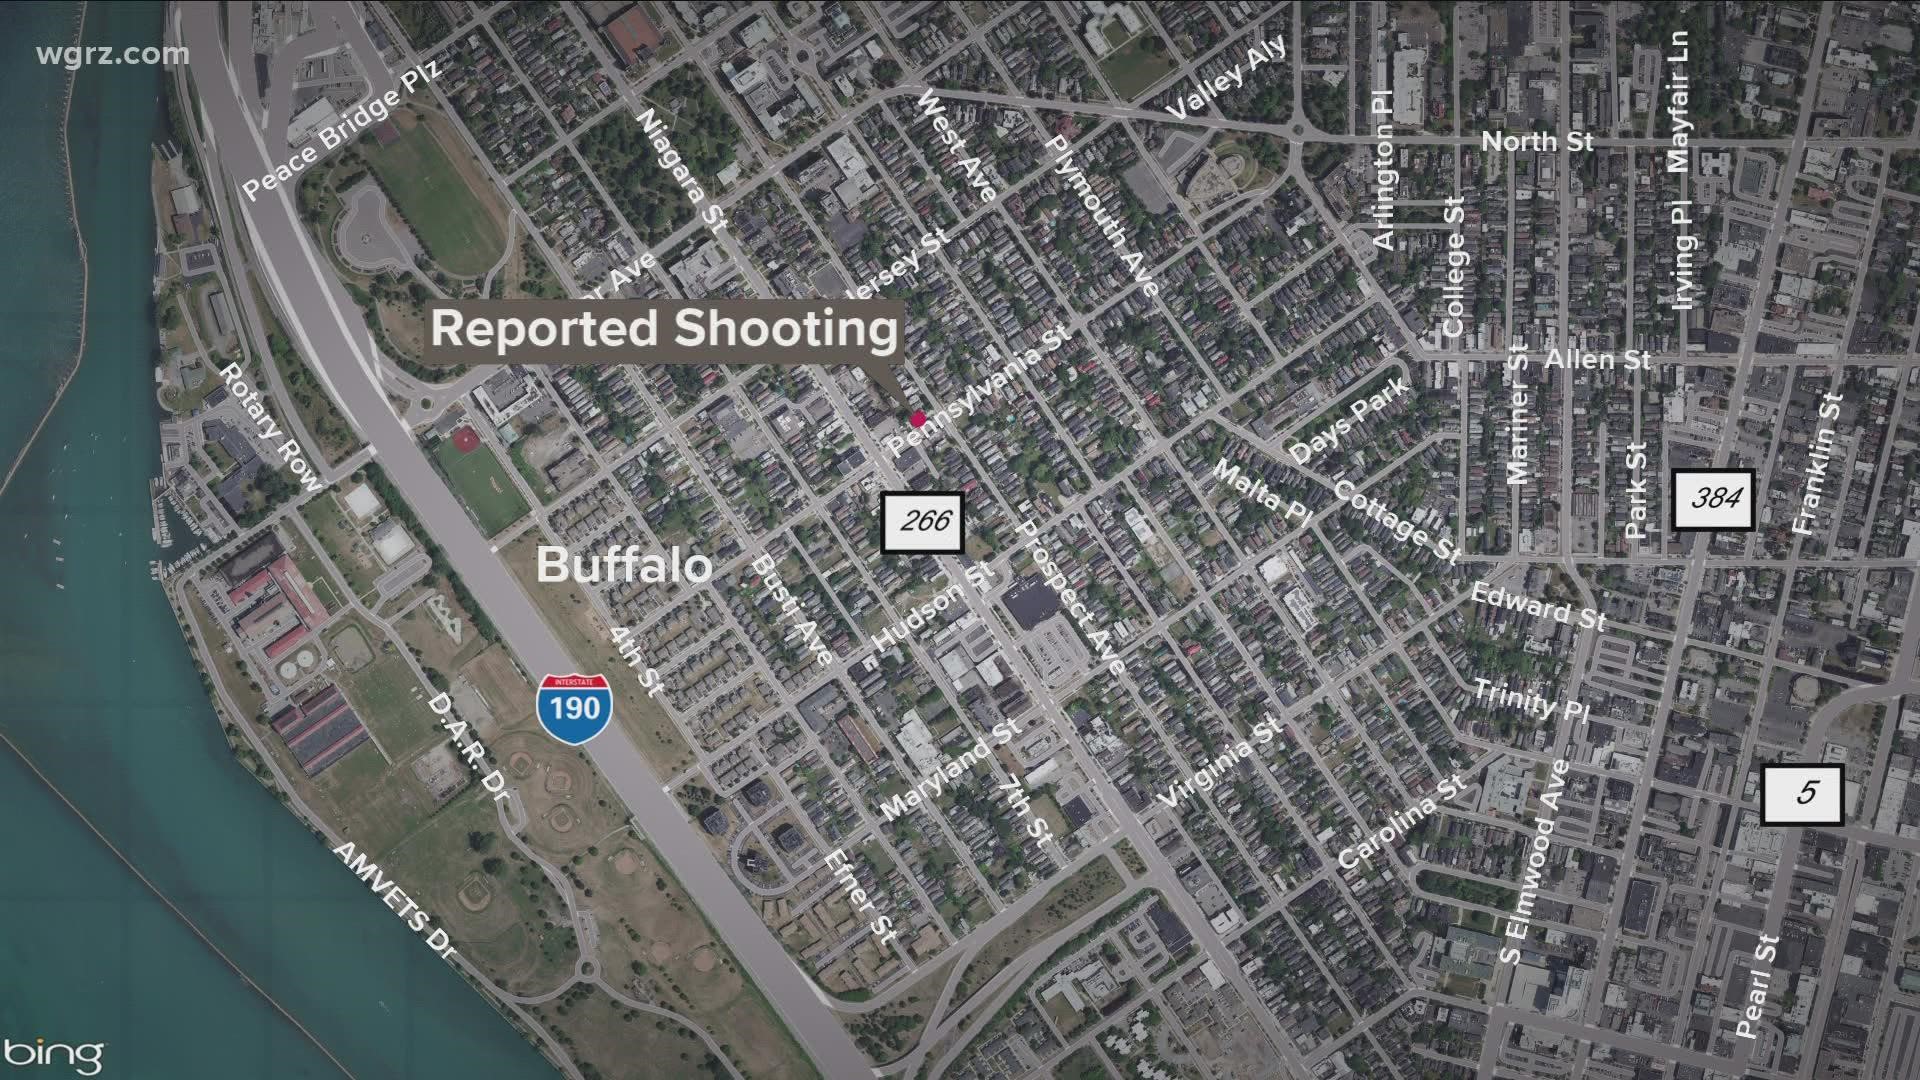 Buffalo Police say the shooting happened shortly before 12:30 a.m. in the 400 block of Prospect Avenue, east of Niagara Street.